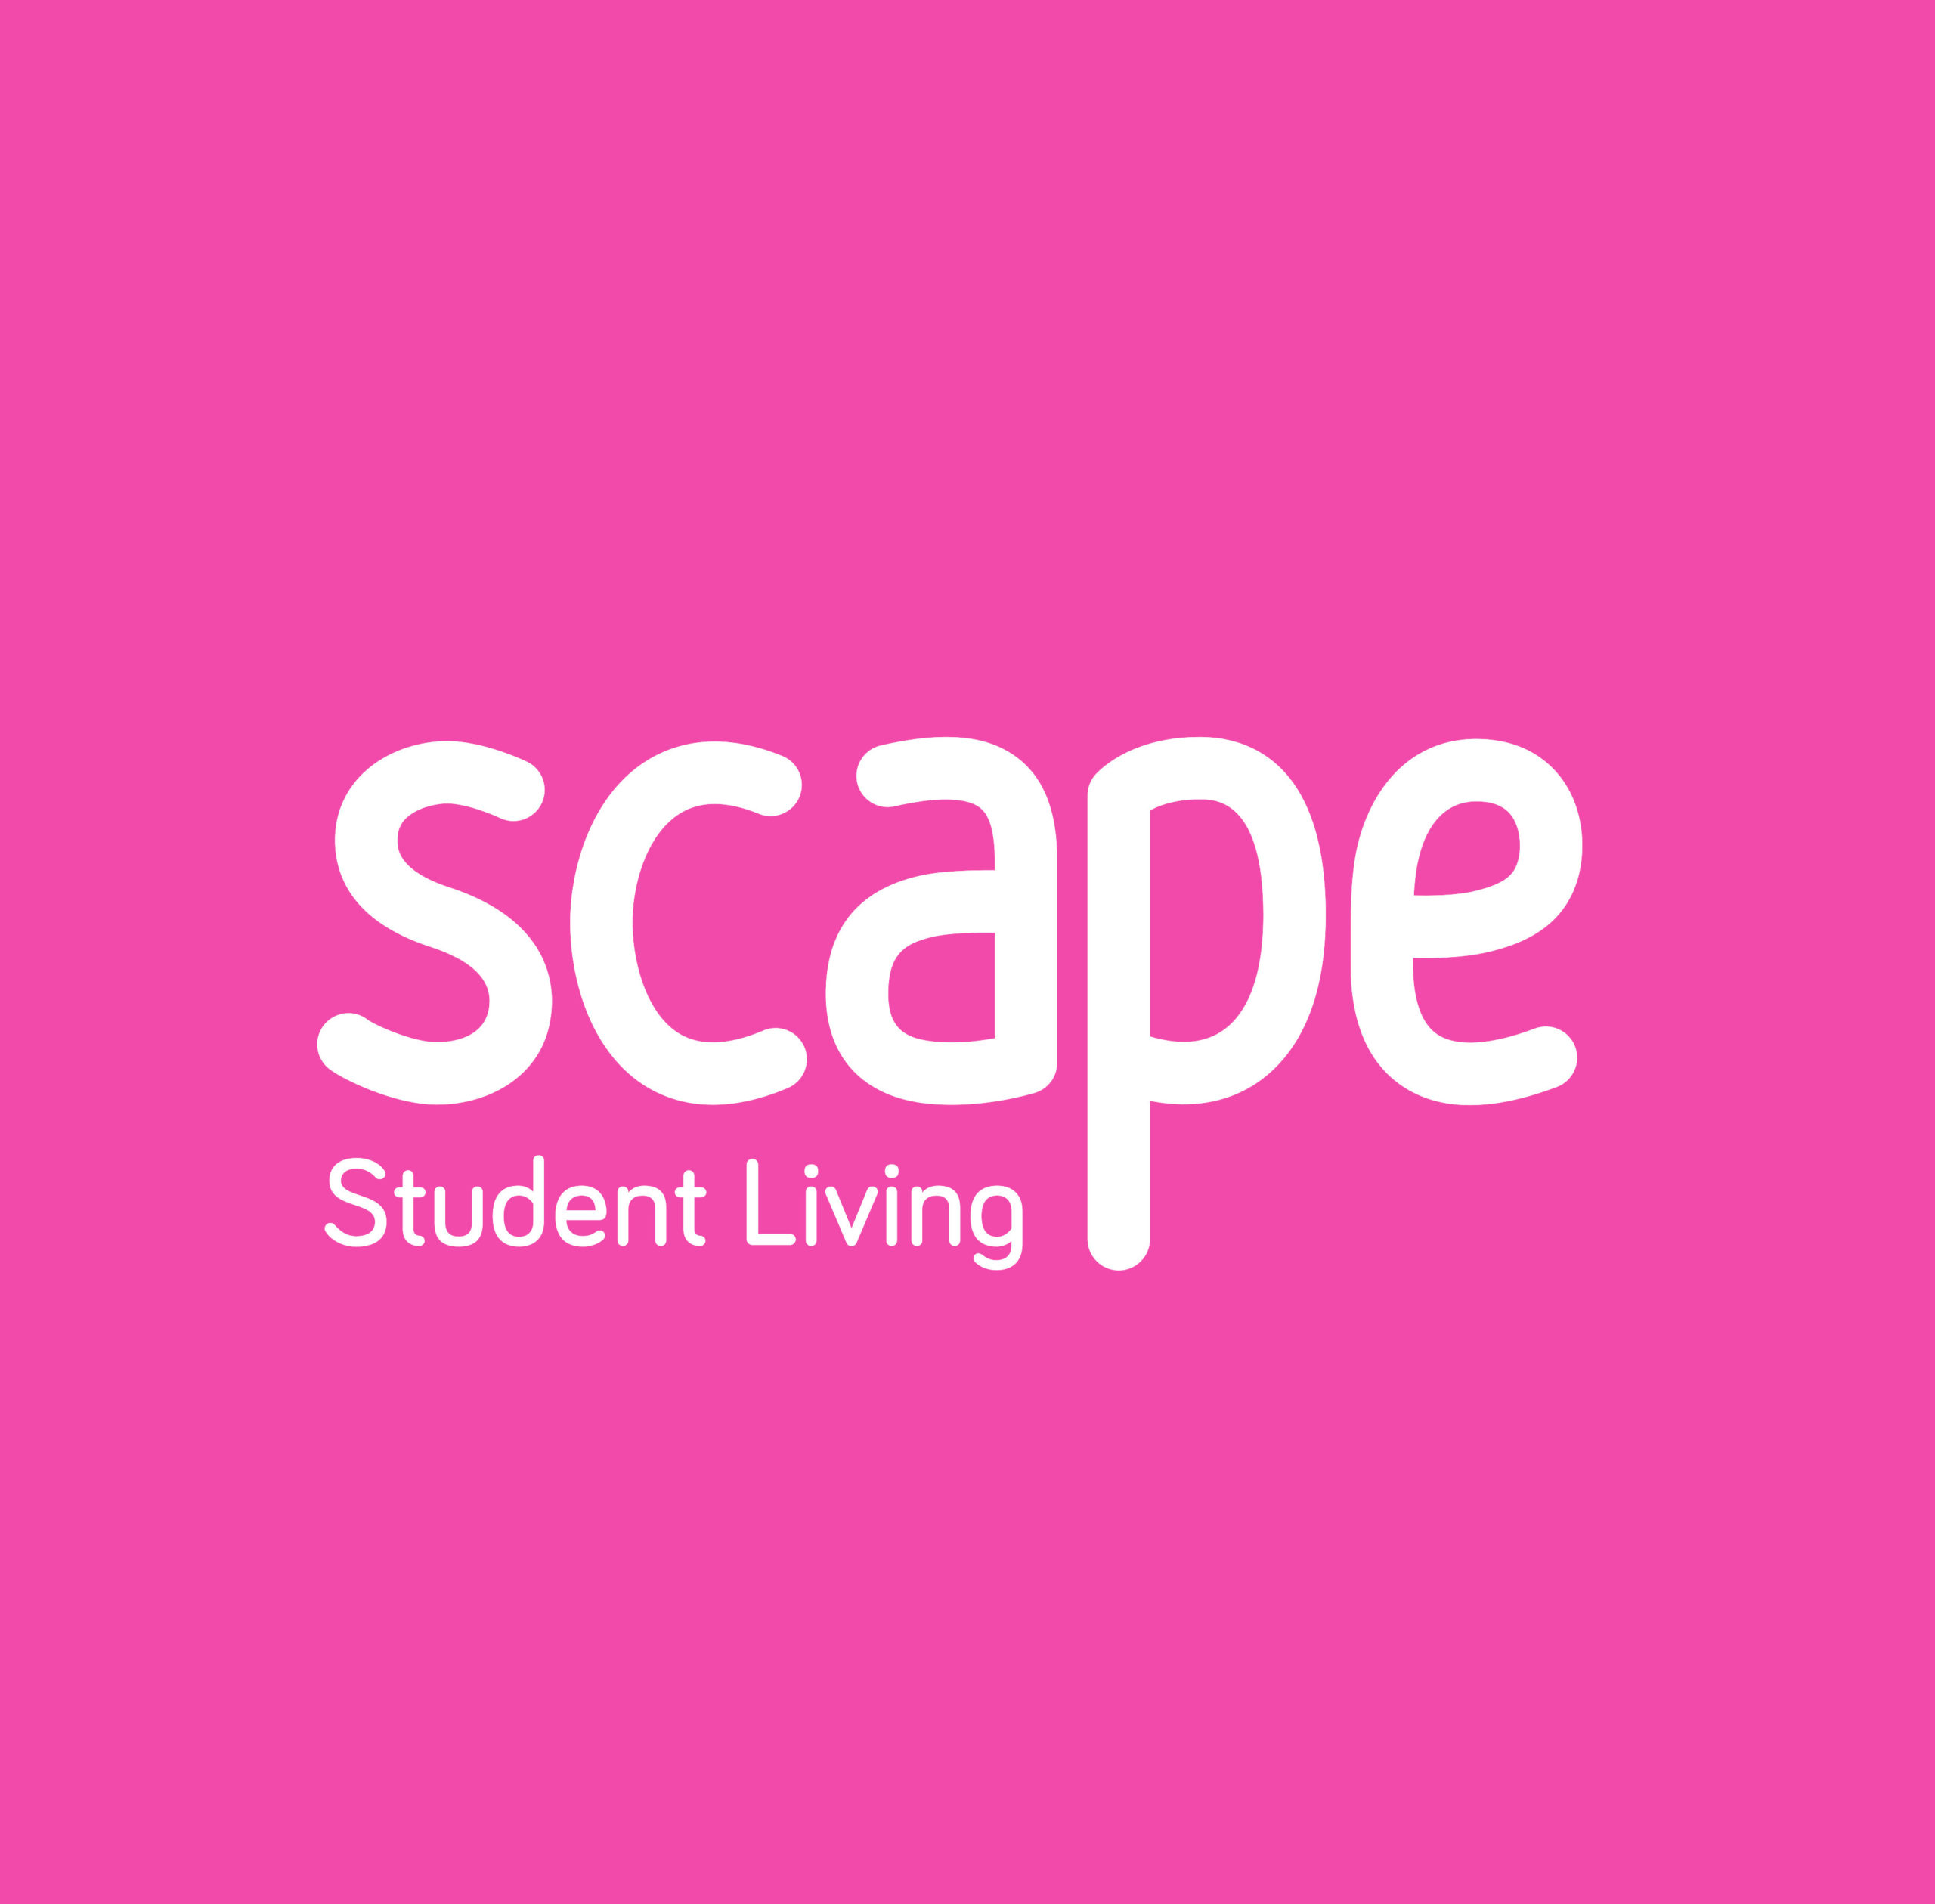 Scape Student Living